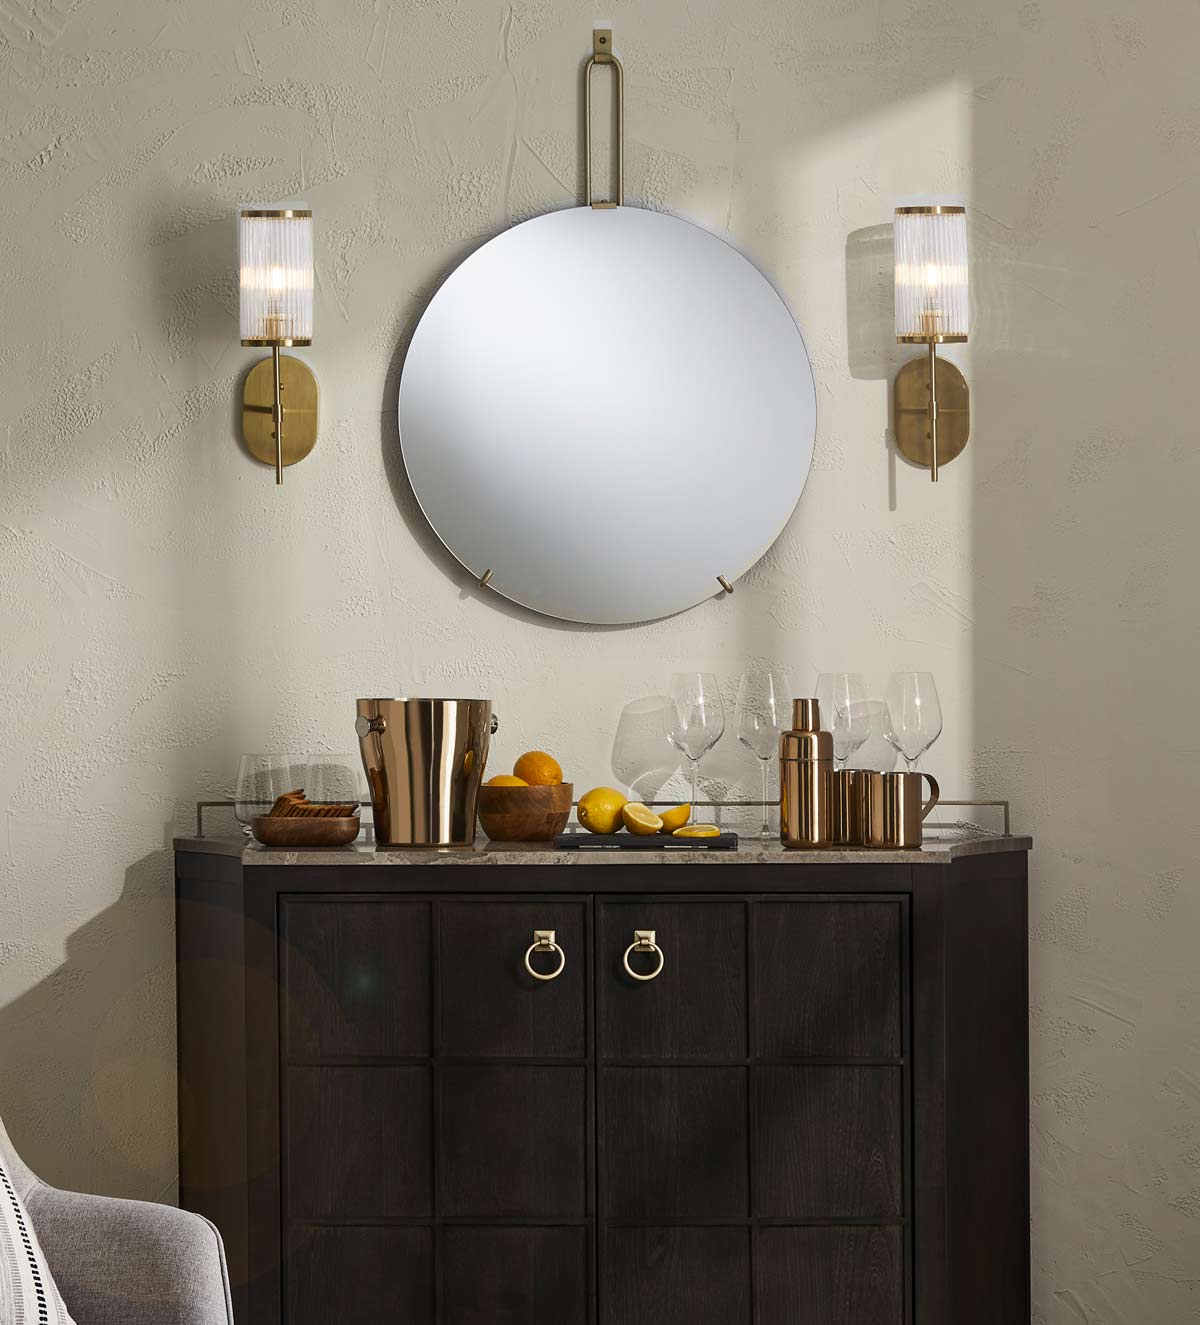 GlucksteinElements | Stylish mirrors to elevate your space